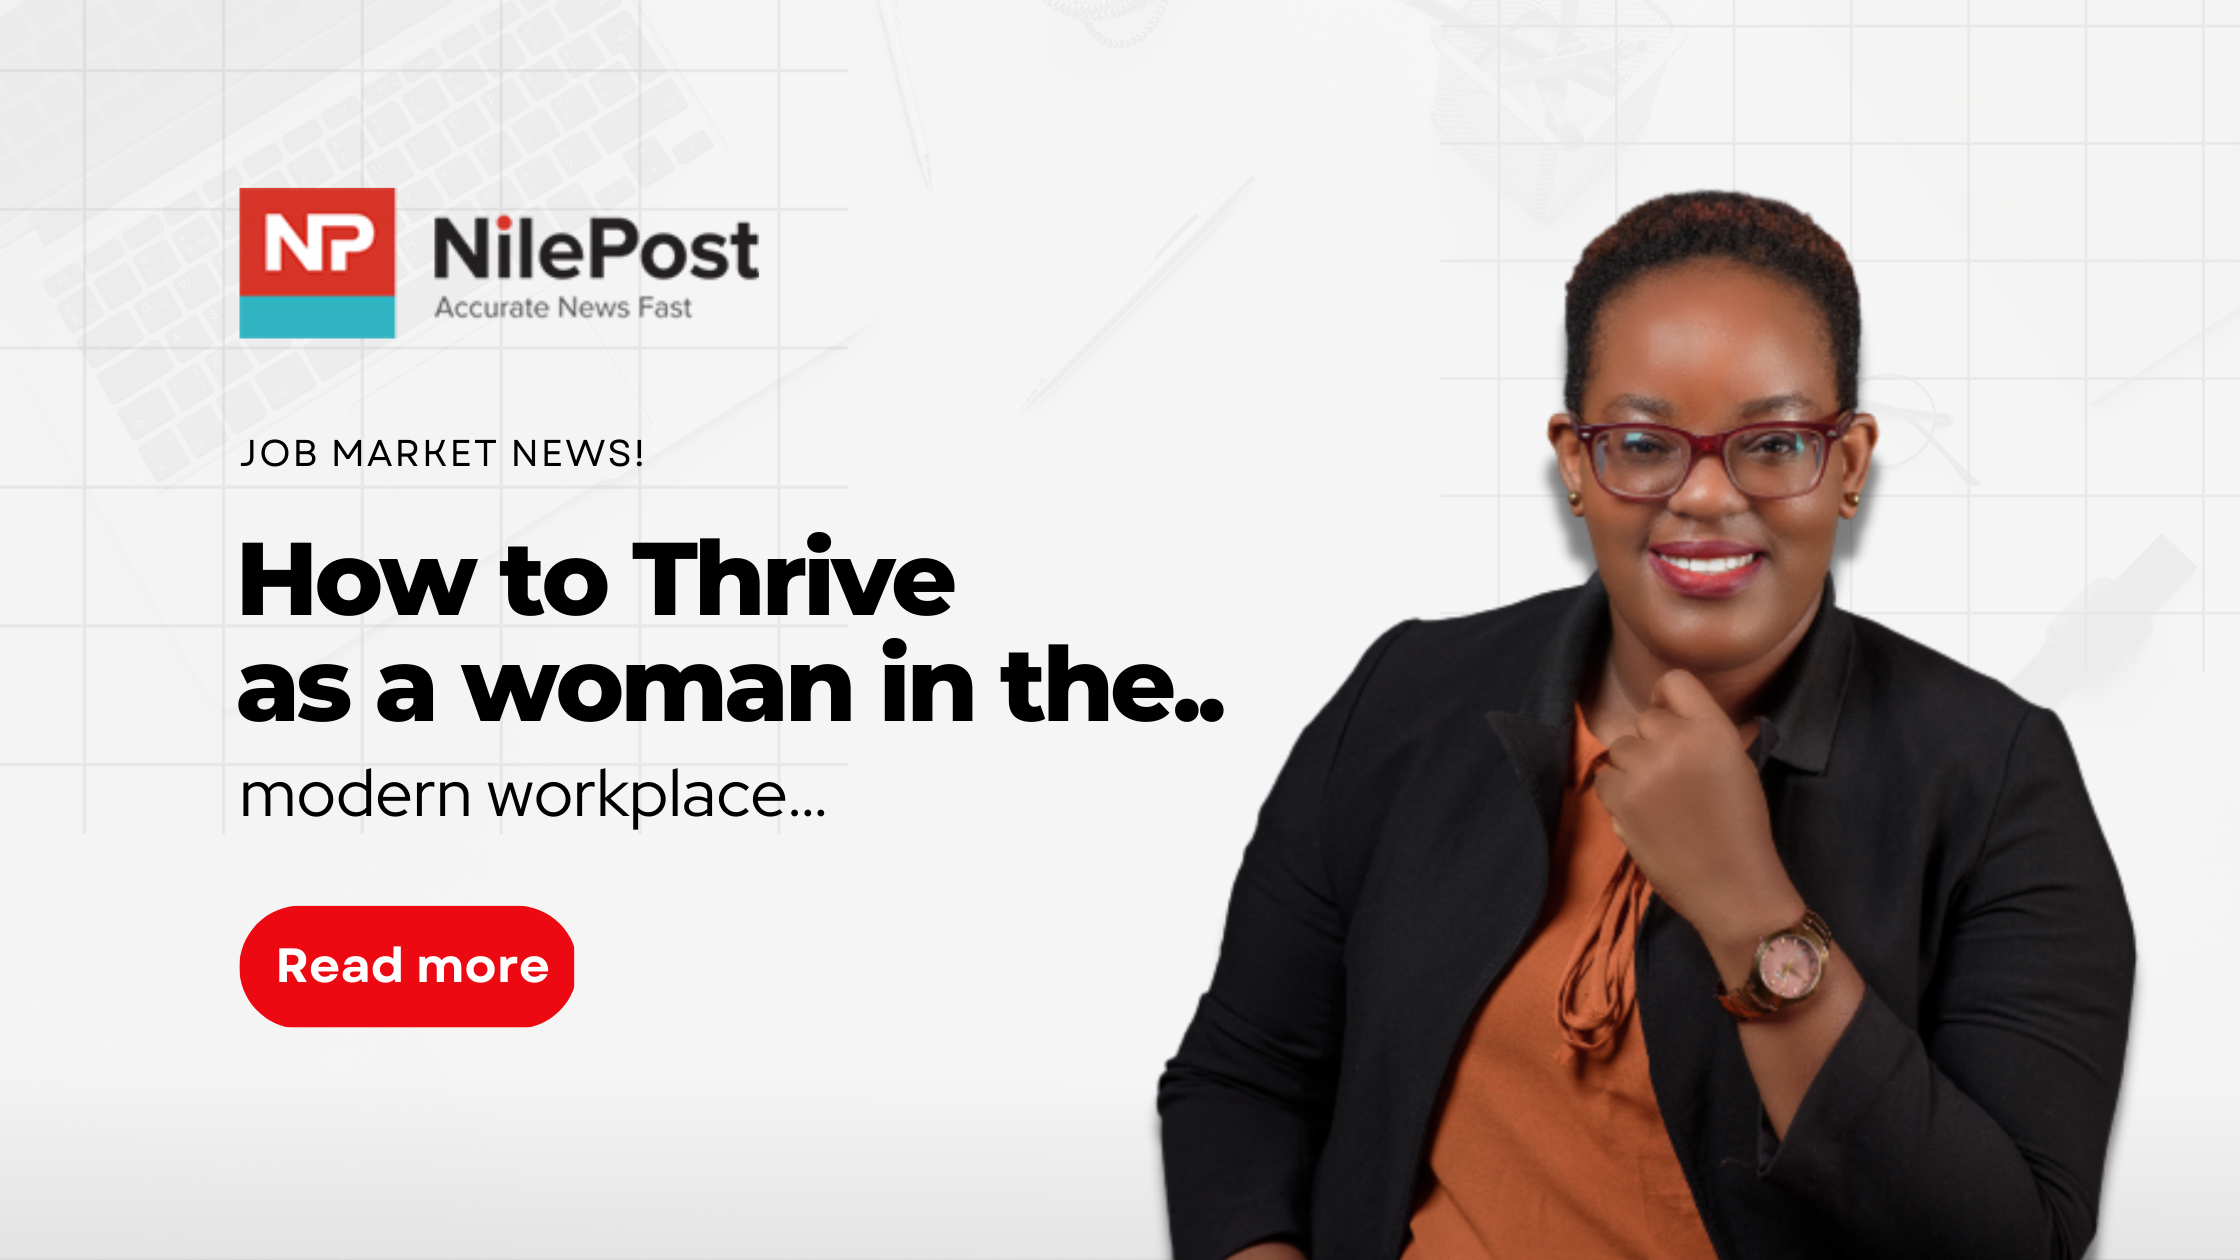 Thriving as a woman in the modern workplace